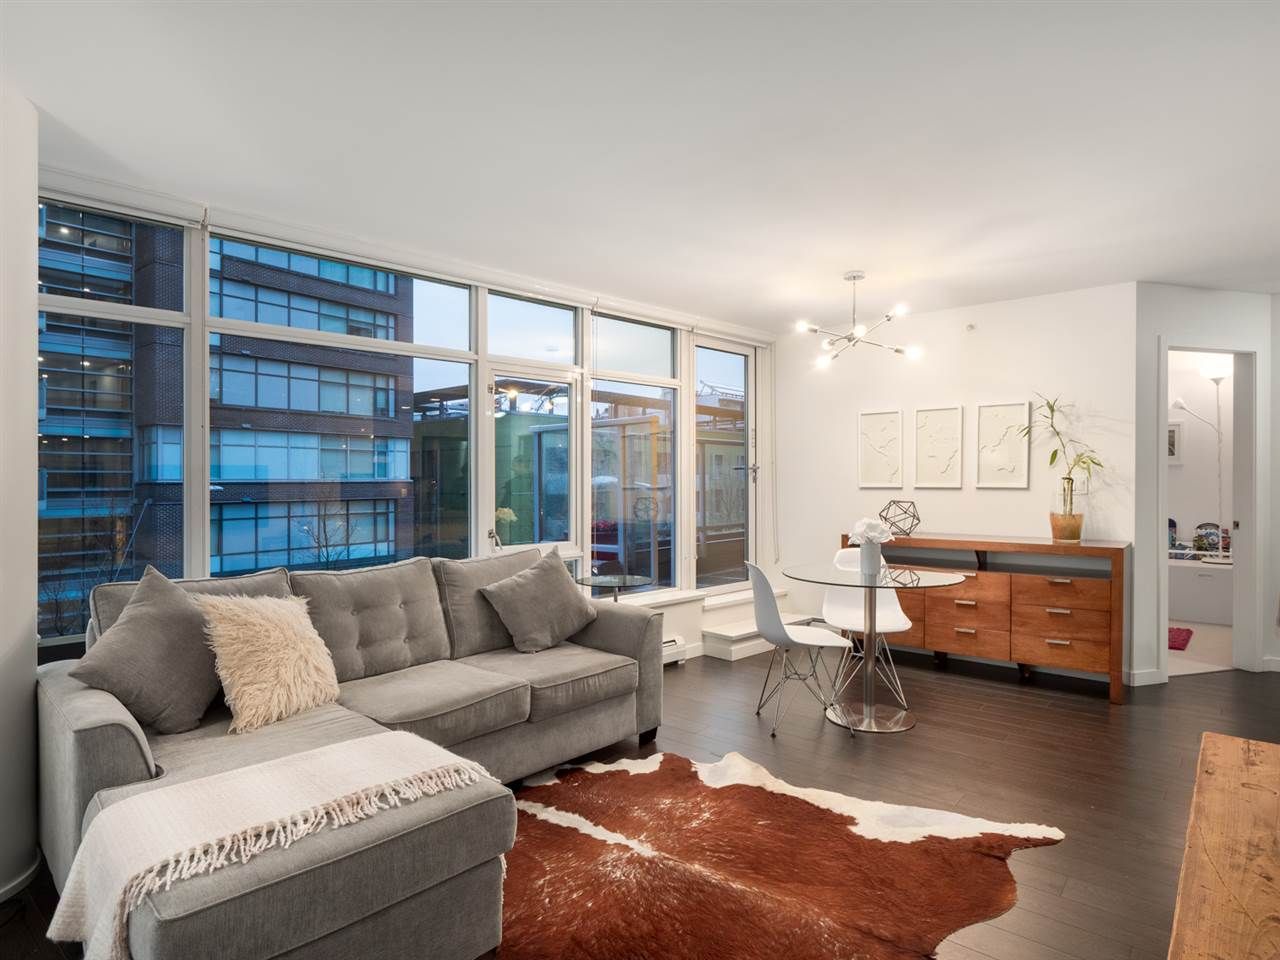 Main Photo: 306 1708 COLUMBIA STREET in Vancouver: False Creek Condo for sale (Vancouver West)  : MLS®# R2341537